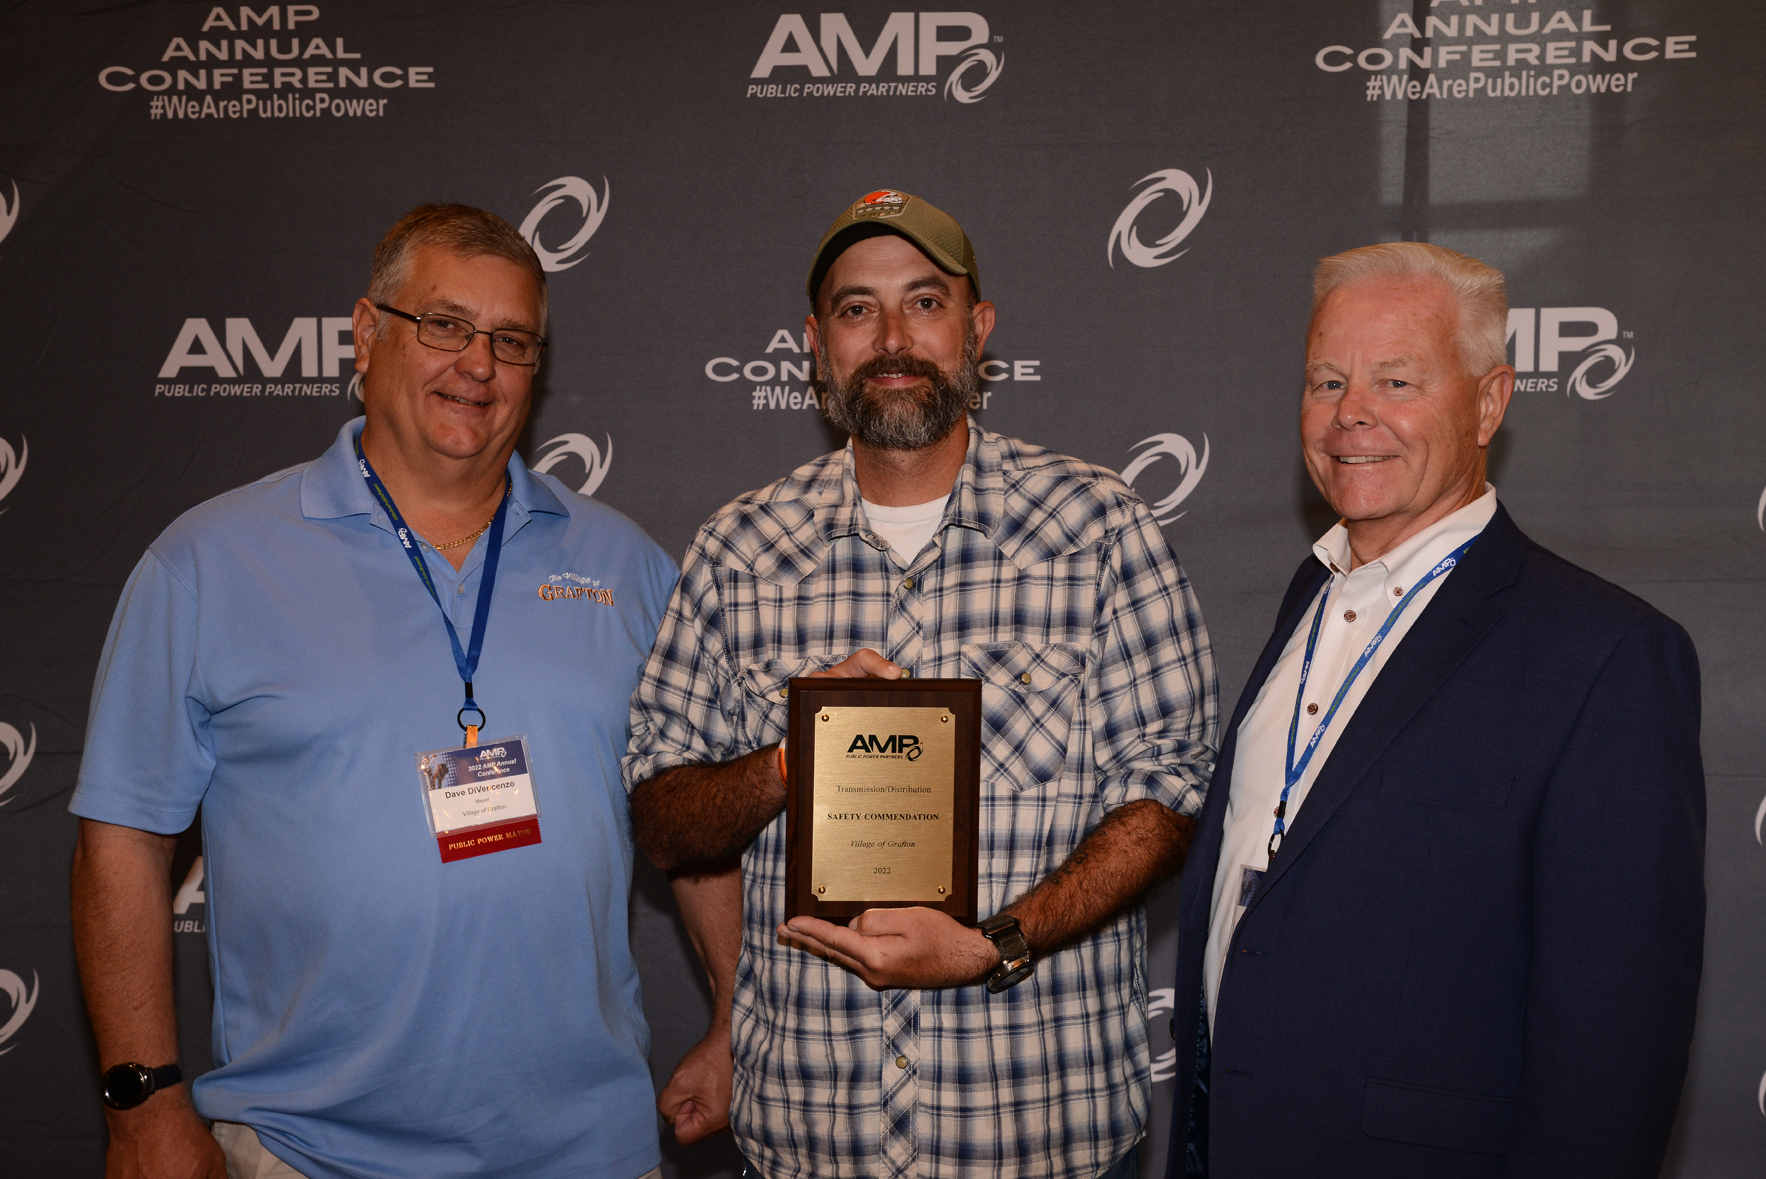 Grafton Mayor Dave DiVencenzo; Ben Palazzi, electric department lead lineman; and Joe Price, village administrator accept the Safety Commendation during the AMP Annual Conference.